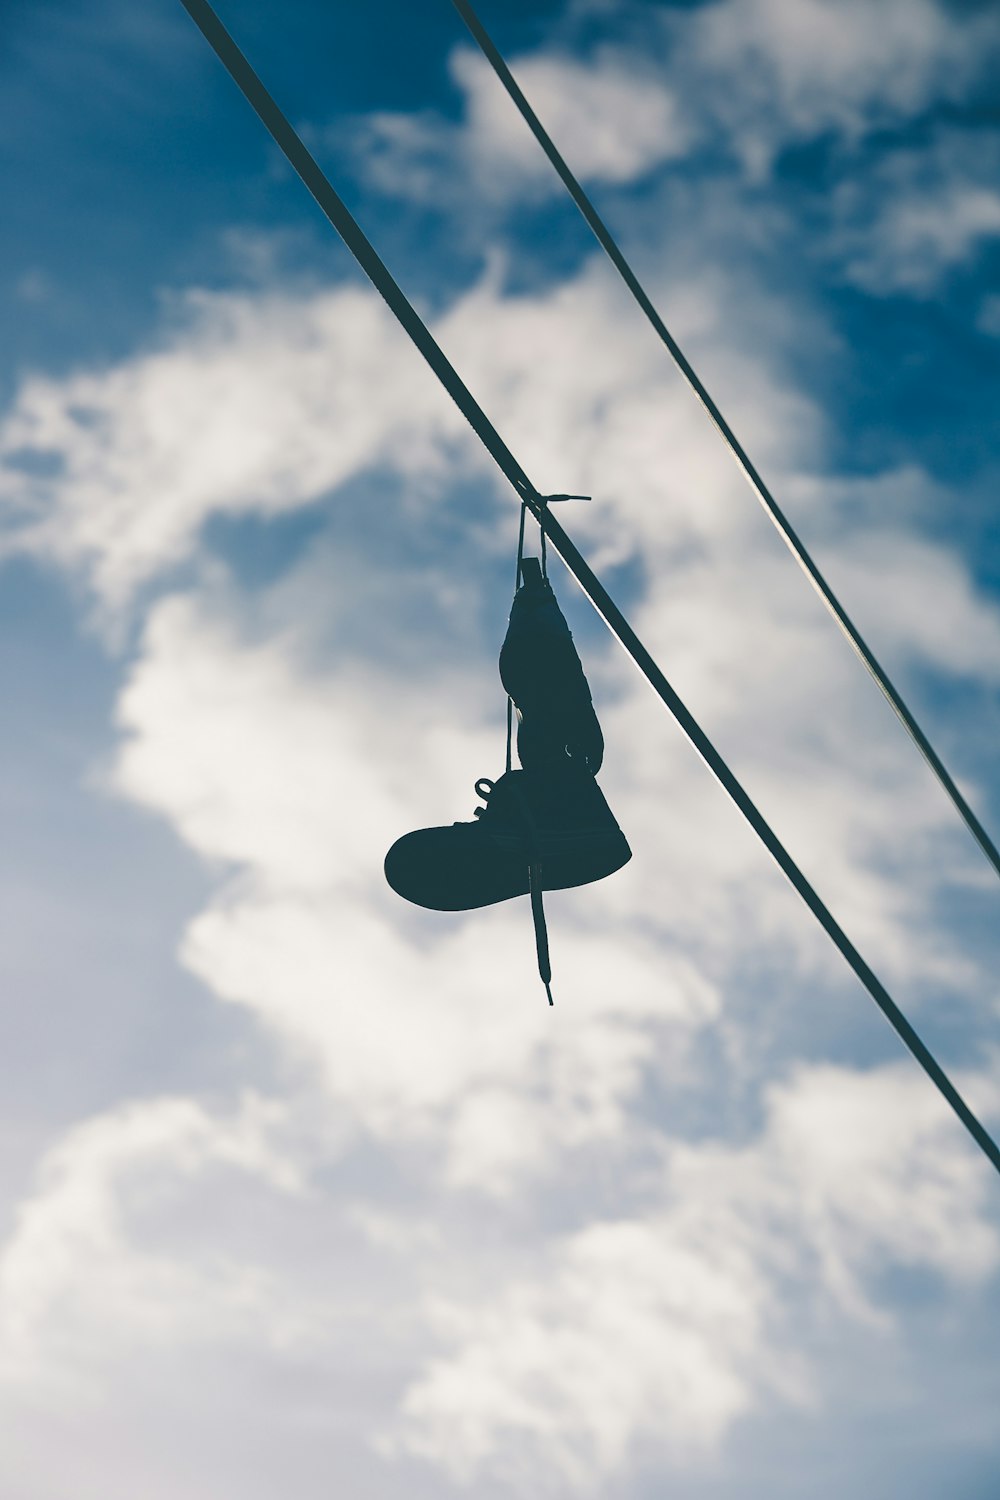 Hanging Shoes Pictures | Download Free Images on Unsplash